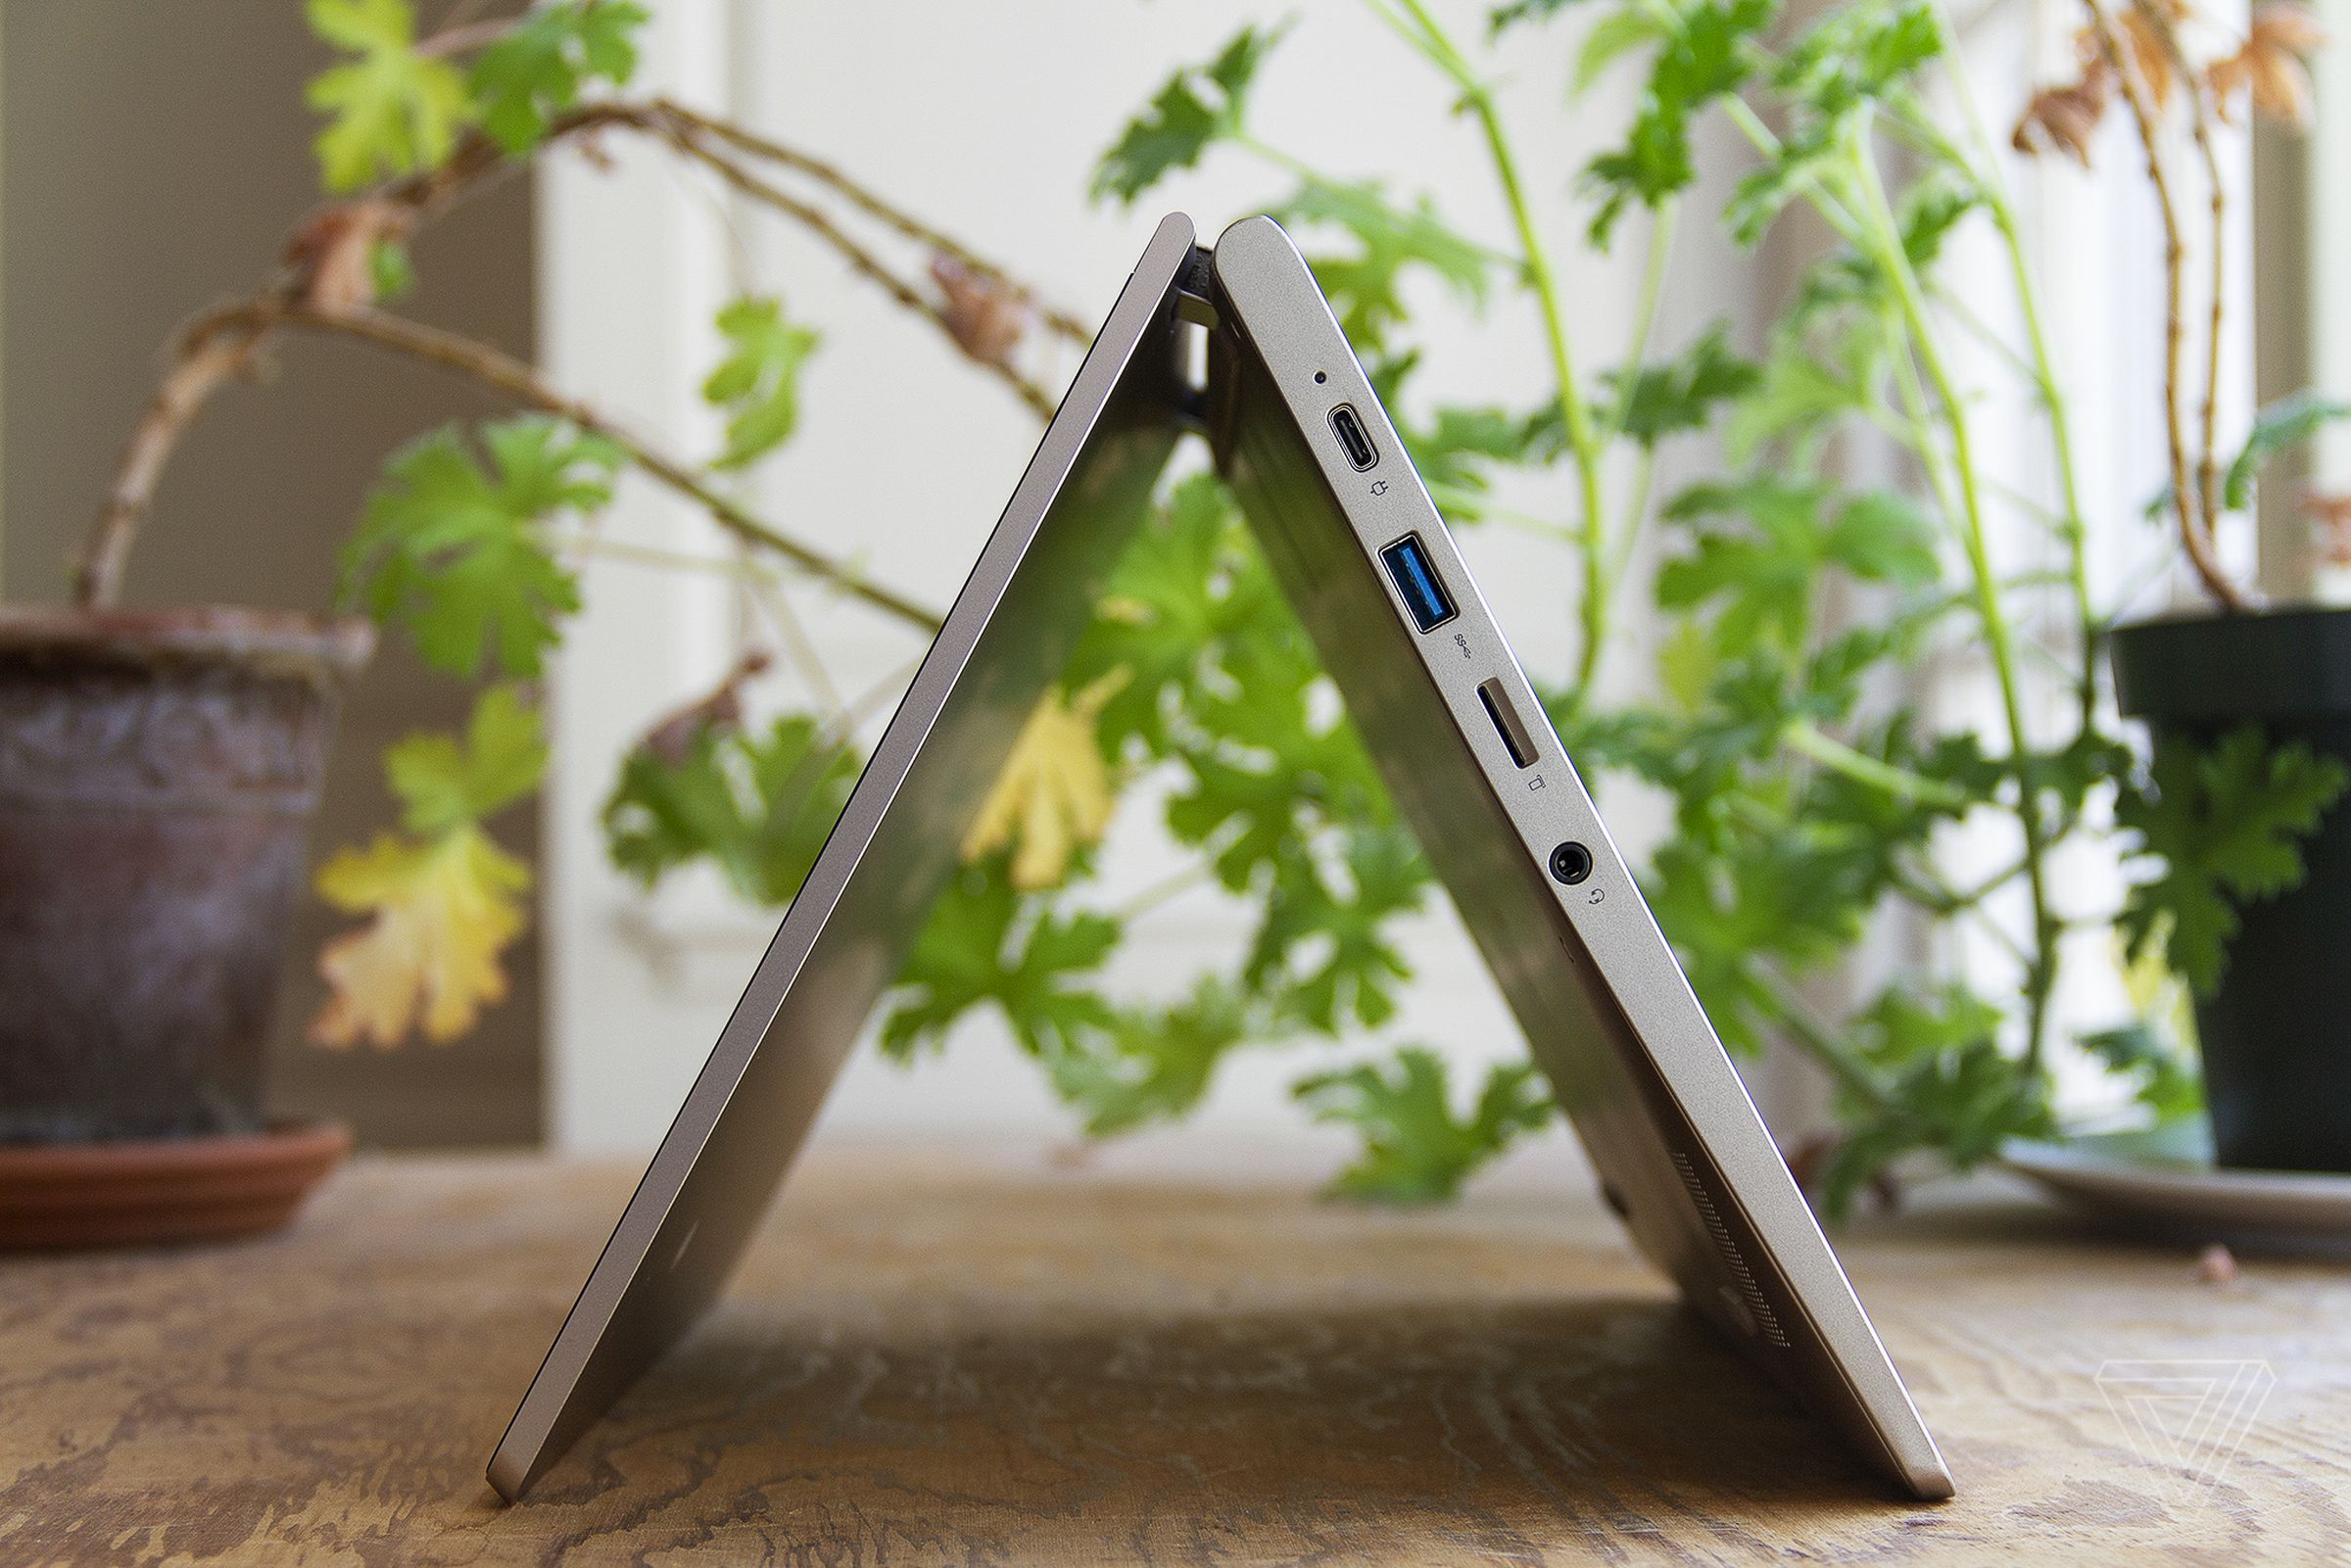 The Lenovo Ideapad Flex 3 in tent mode, seen from the left side, with two houseplants in the background.